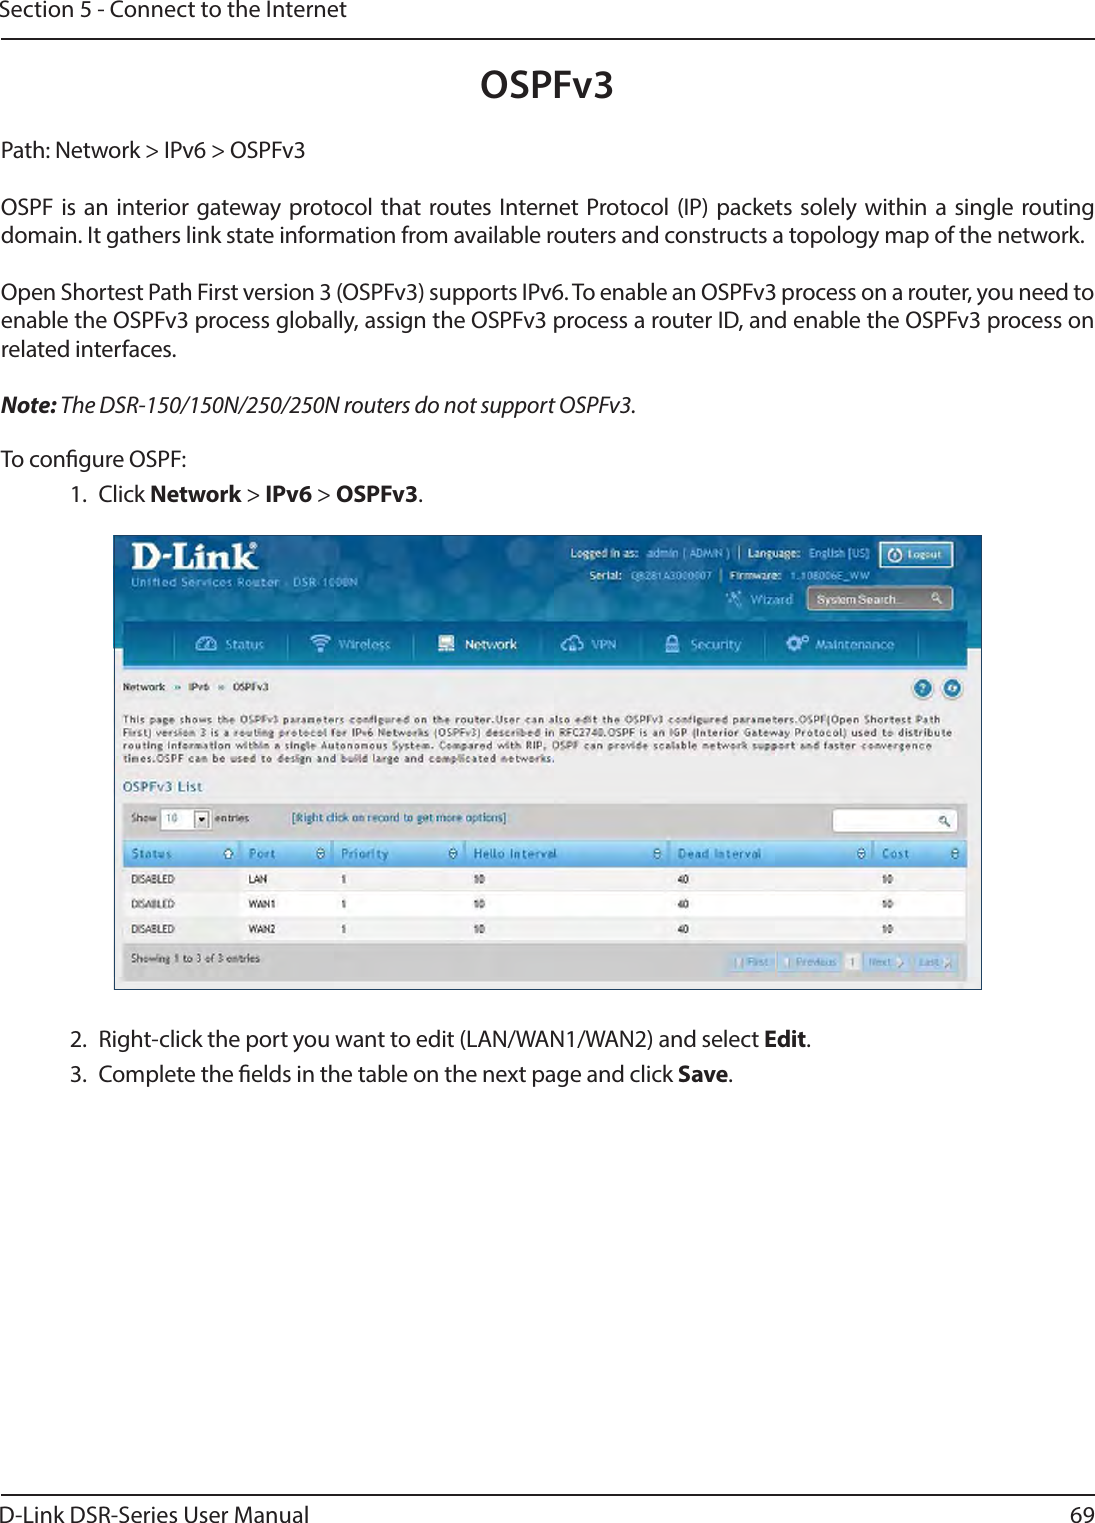 D-Link DSR-Series User Manual 69Section 5 - Connect to the InternetPath: Network &gt; IPv6 &gt; OSPFv3OSPF is an interior gateway protocol that routes Internet Protocol (IP) packets solely within a single routing domain. It gathers link state information from available routers and constructs a topology map of the network.Open Shortest Path First version 3 (OSPFv3) supports IPv6. To enable an OSPFv3 process on a router, you need to enable the OSPFv3 process globally, assign the OSPFv3 process a router ID, and enable the OSPFv3 process on related interfaces.Note: The DSR-150/150N/250/250N routers do not support OSPFv3.To congure OSPF:1. Click Network &gt; IPv6 &gt; OSPFv3.2.  Right-click the port you want to edit (LAN/WAN1/WAN2) and select Edit.3.  Complete the elds in the table on the next page and click Save.OSPFv3